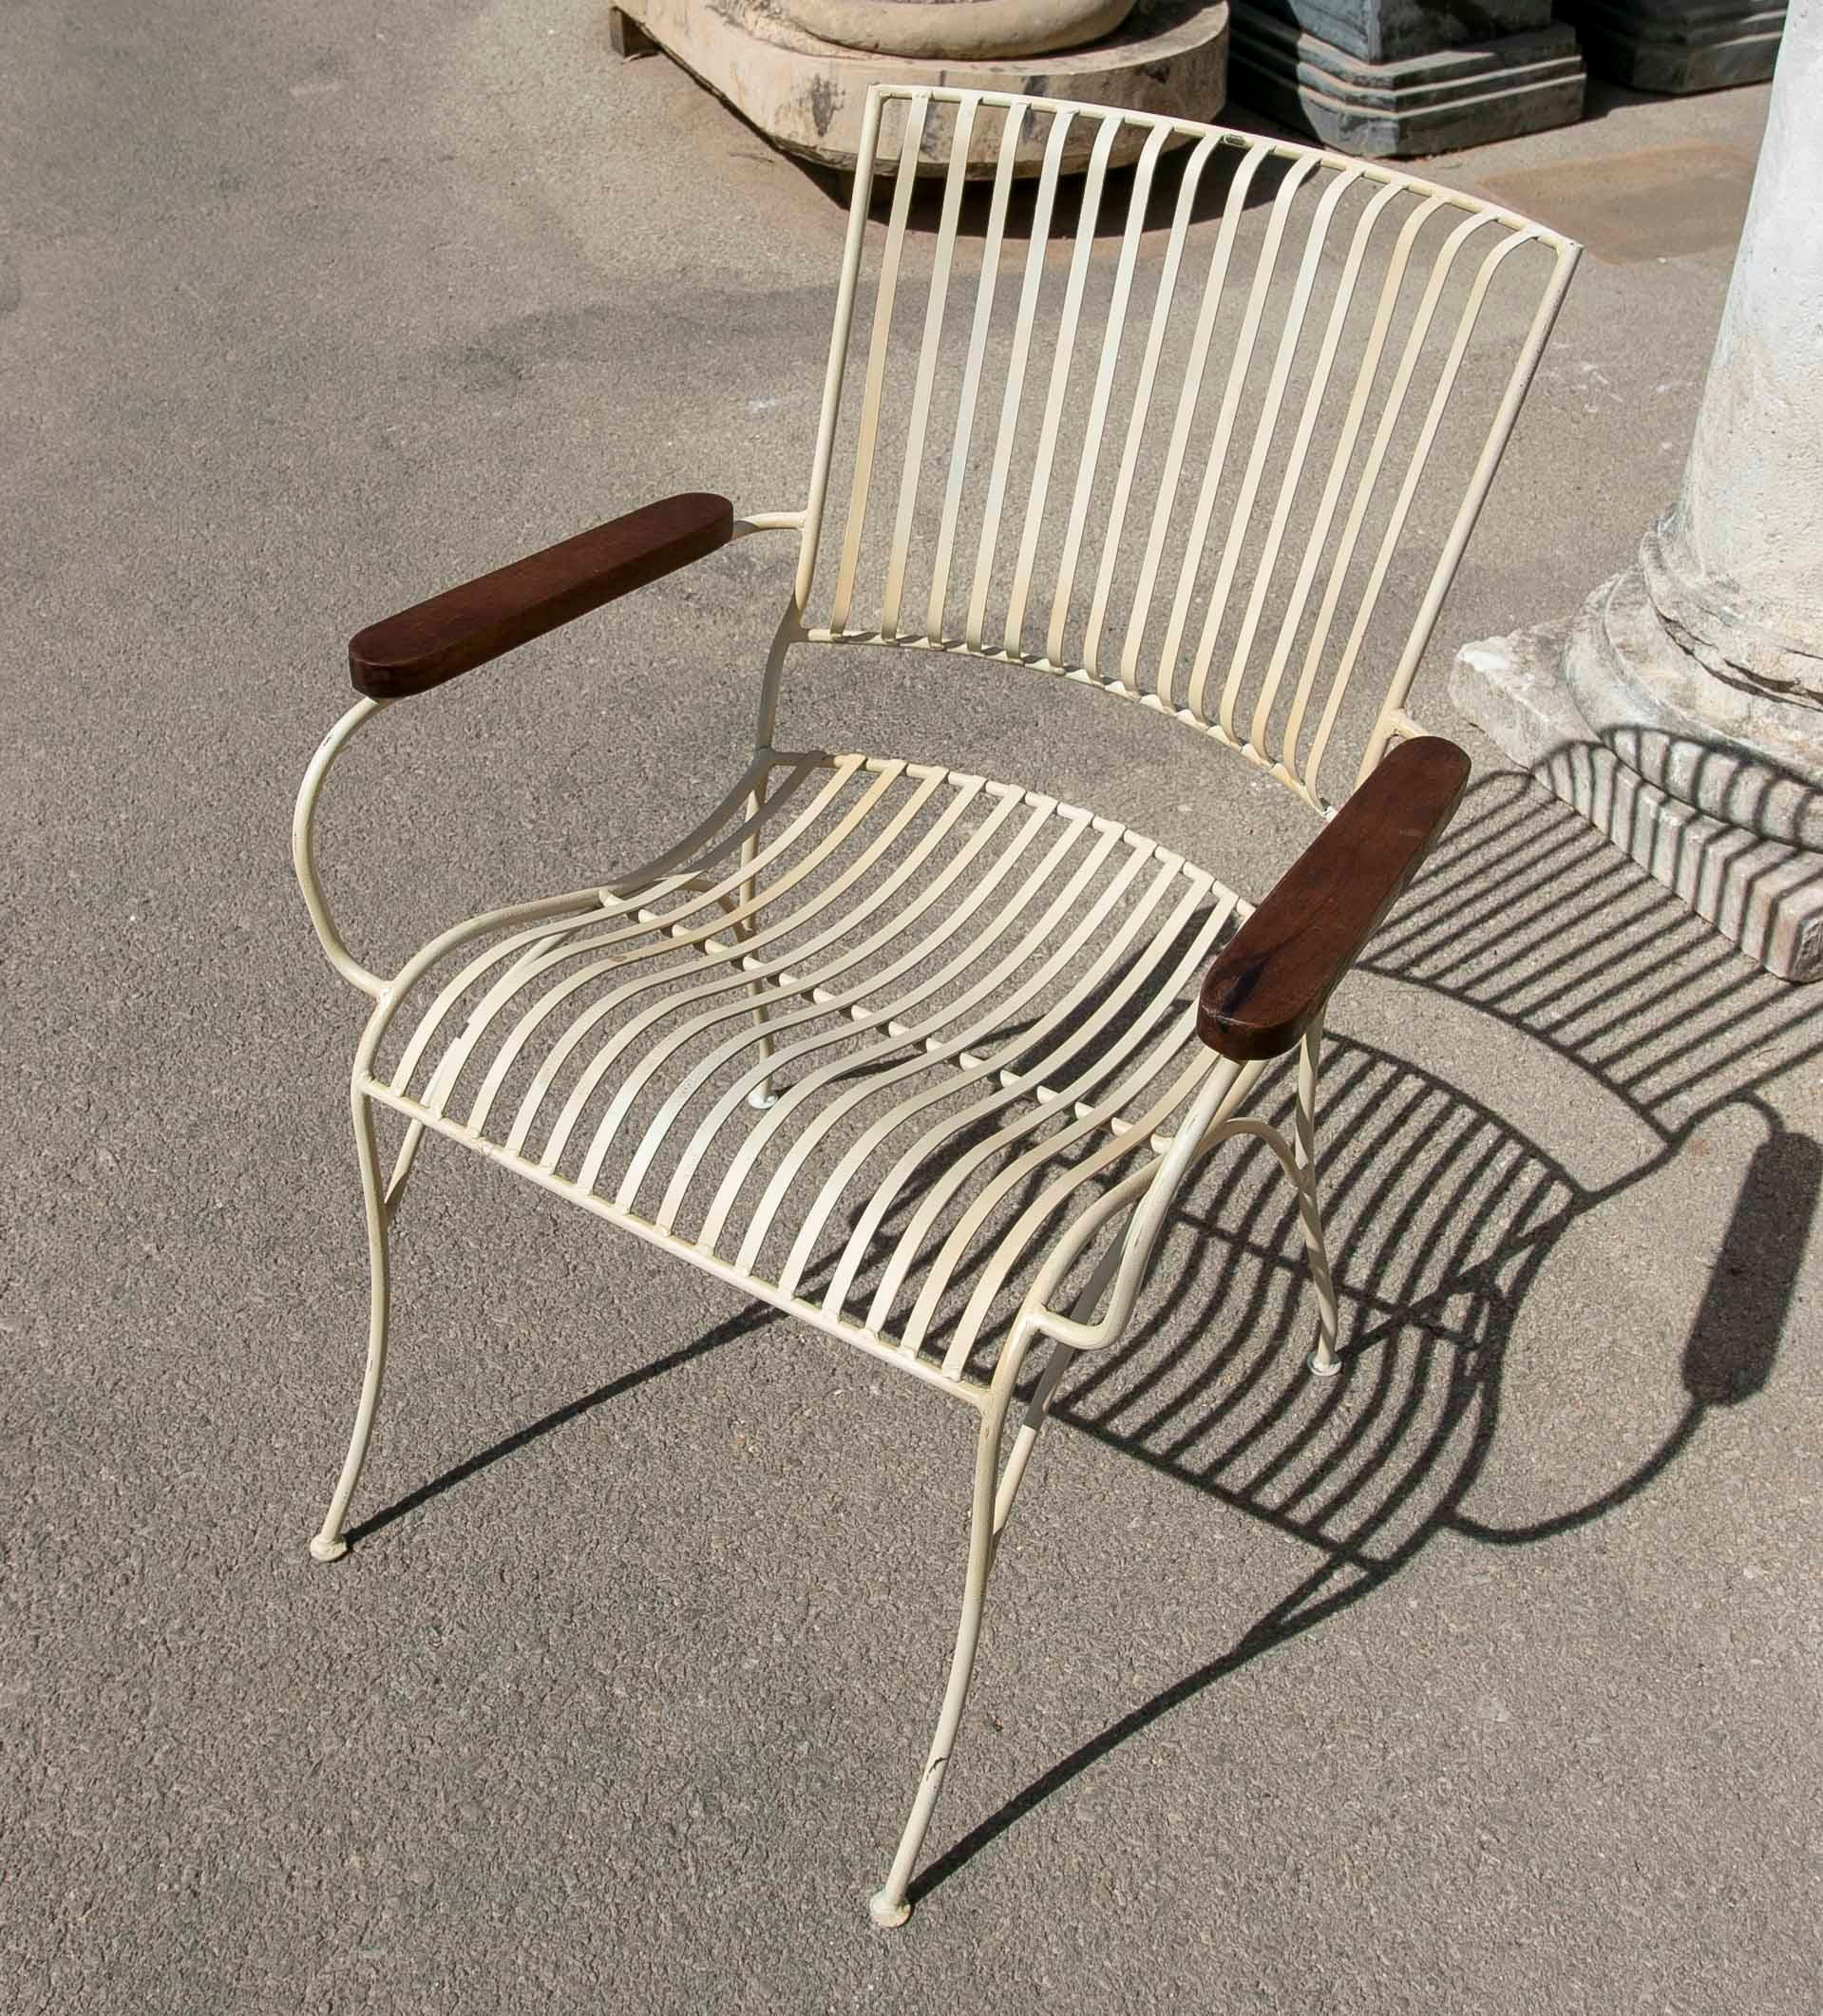 Pair of Garden Chairs Made of Iron with Wooden Armrests  For Sale 2